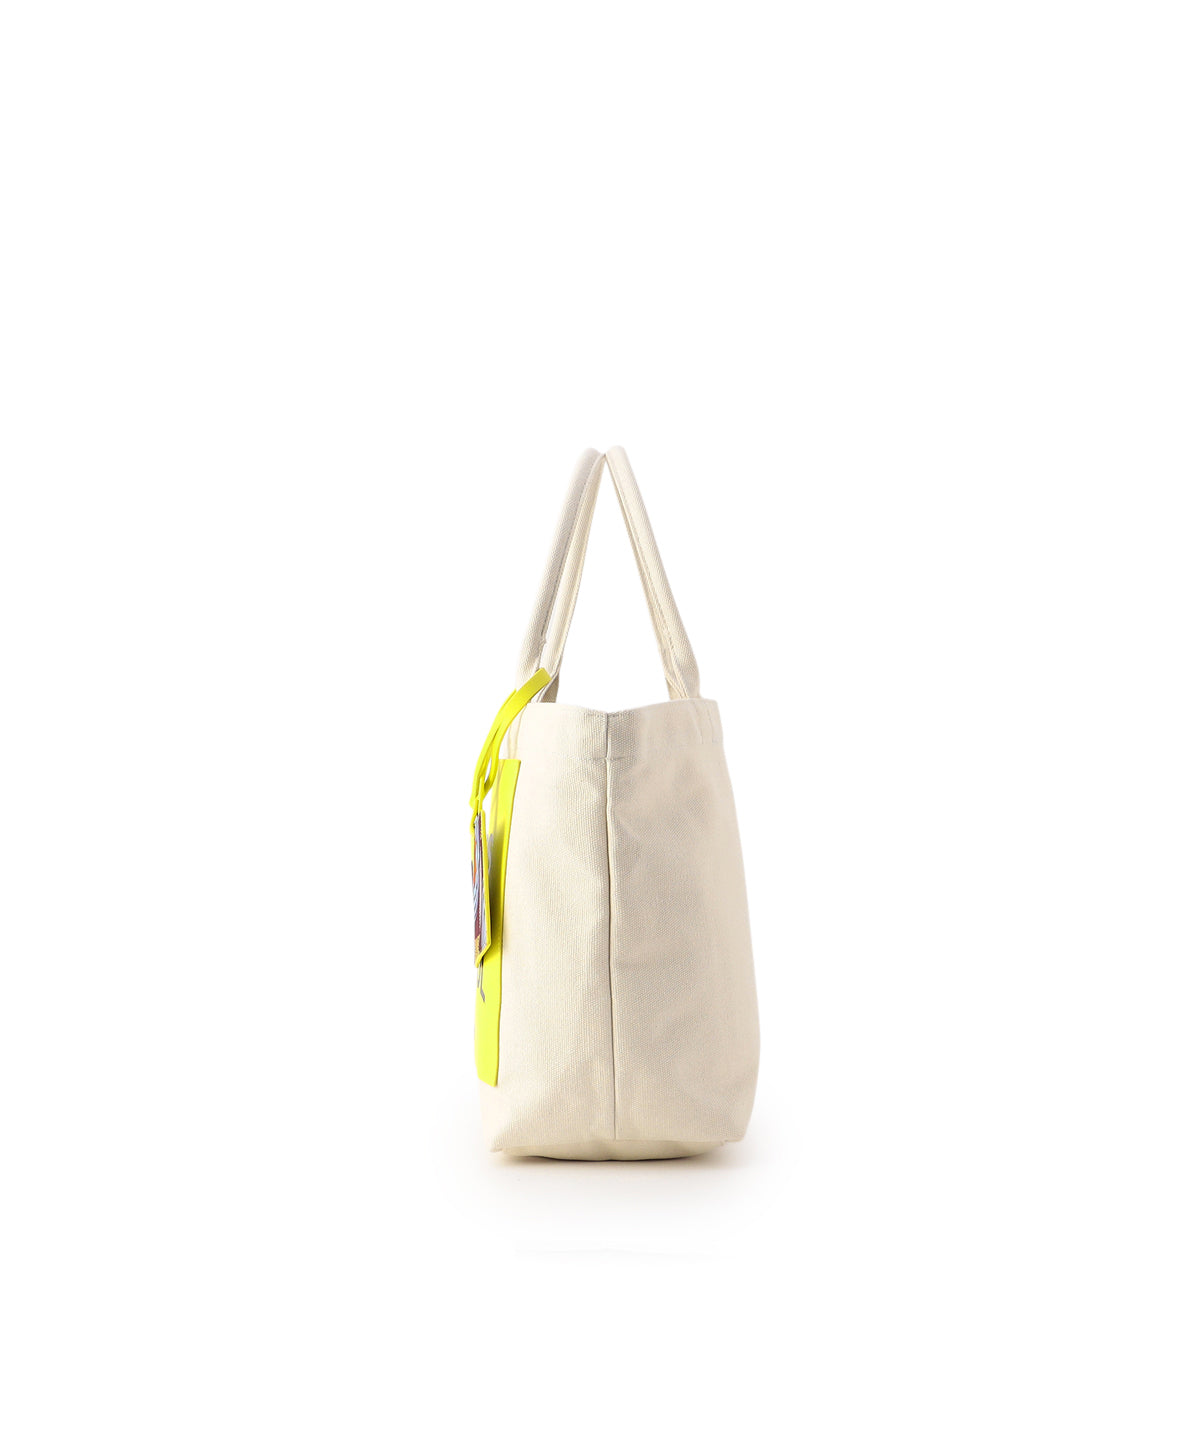 Recycled Canvas Tote (Medium) YELLOW